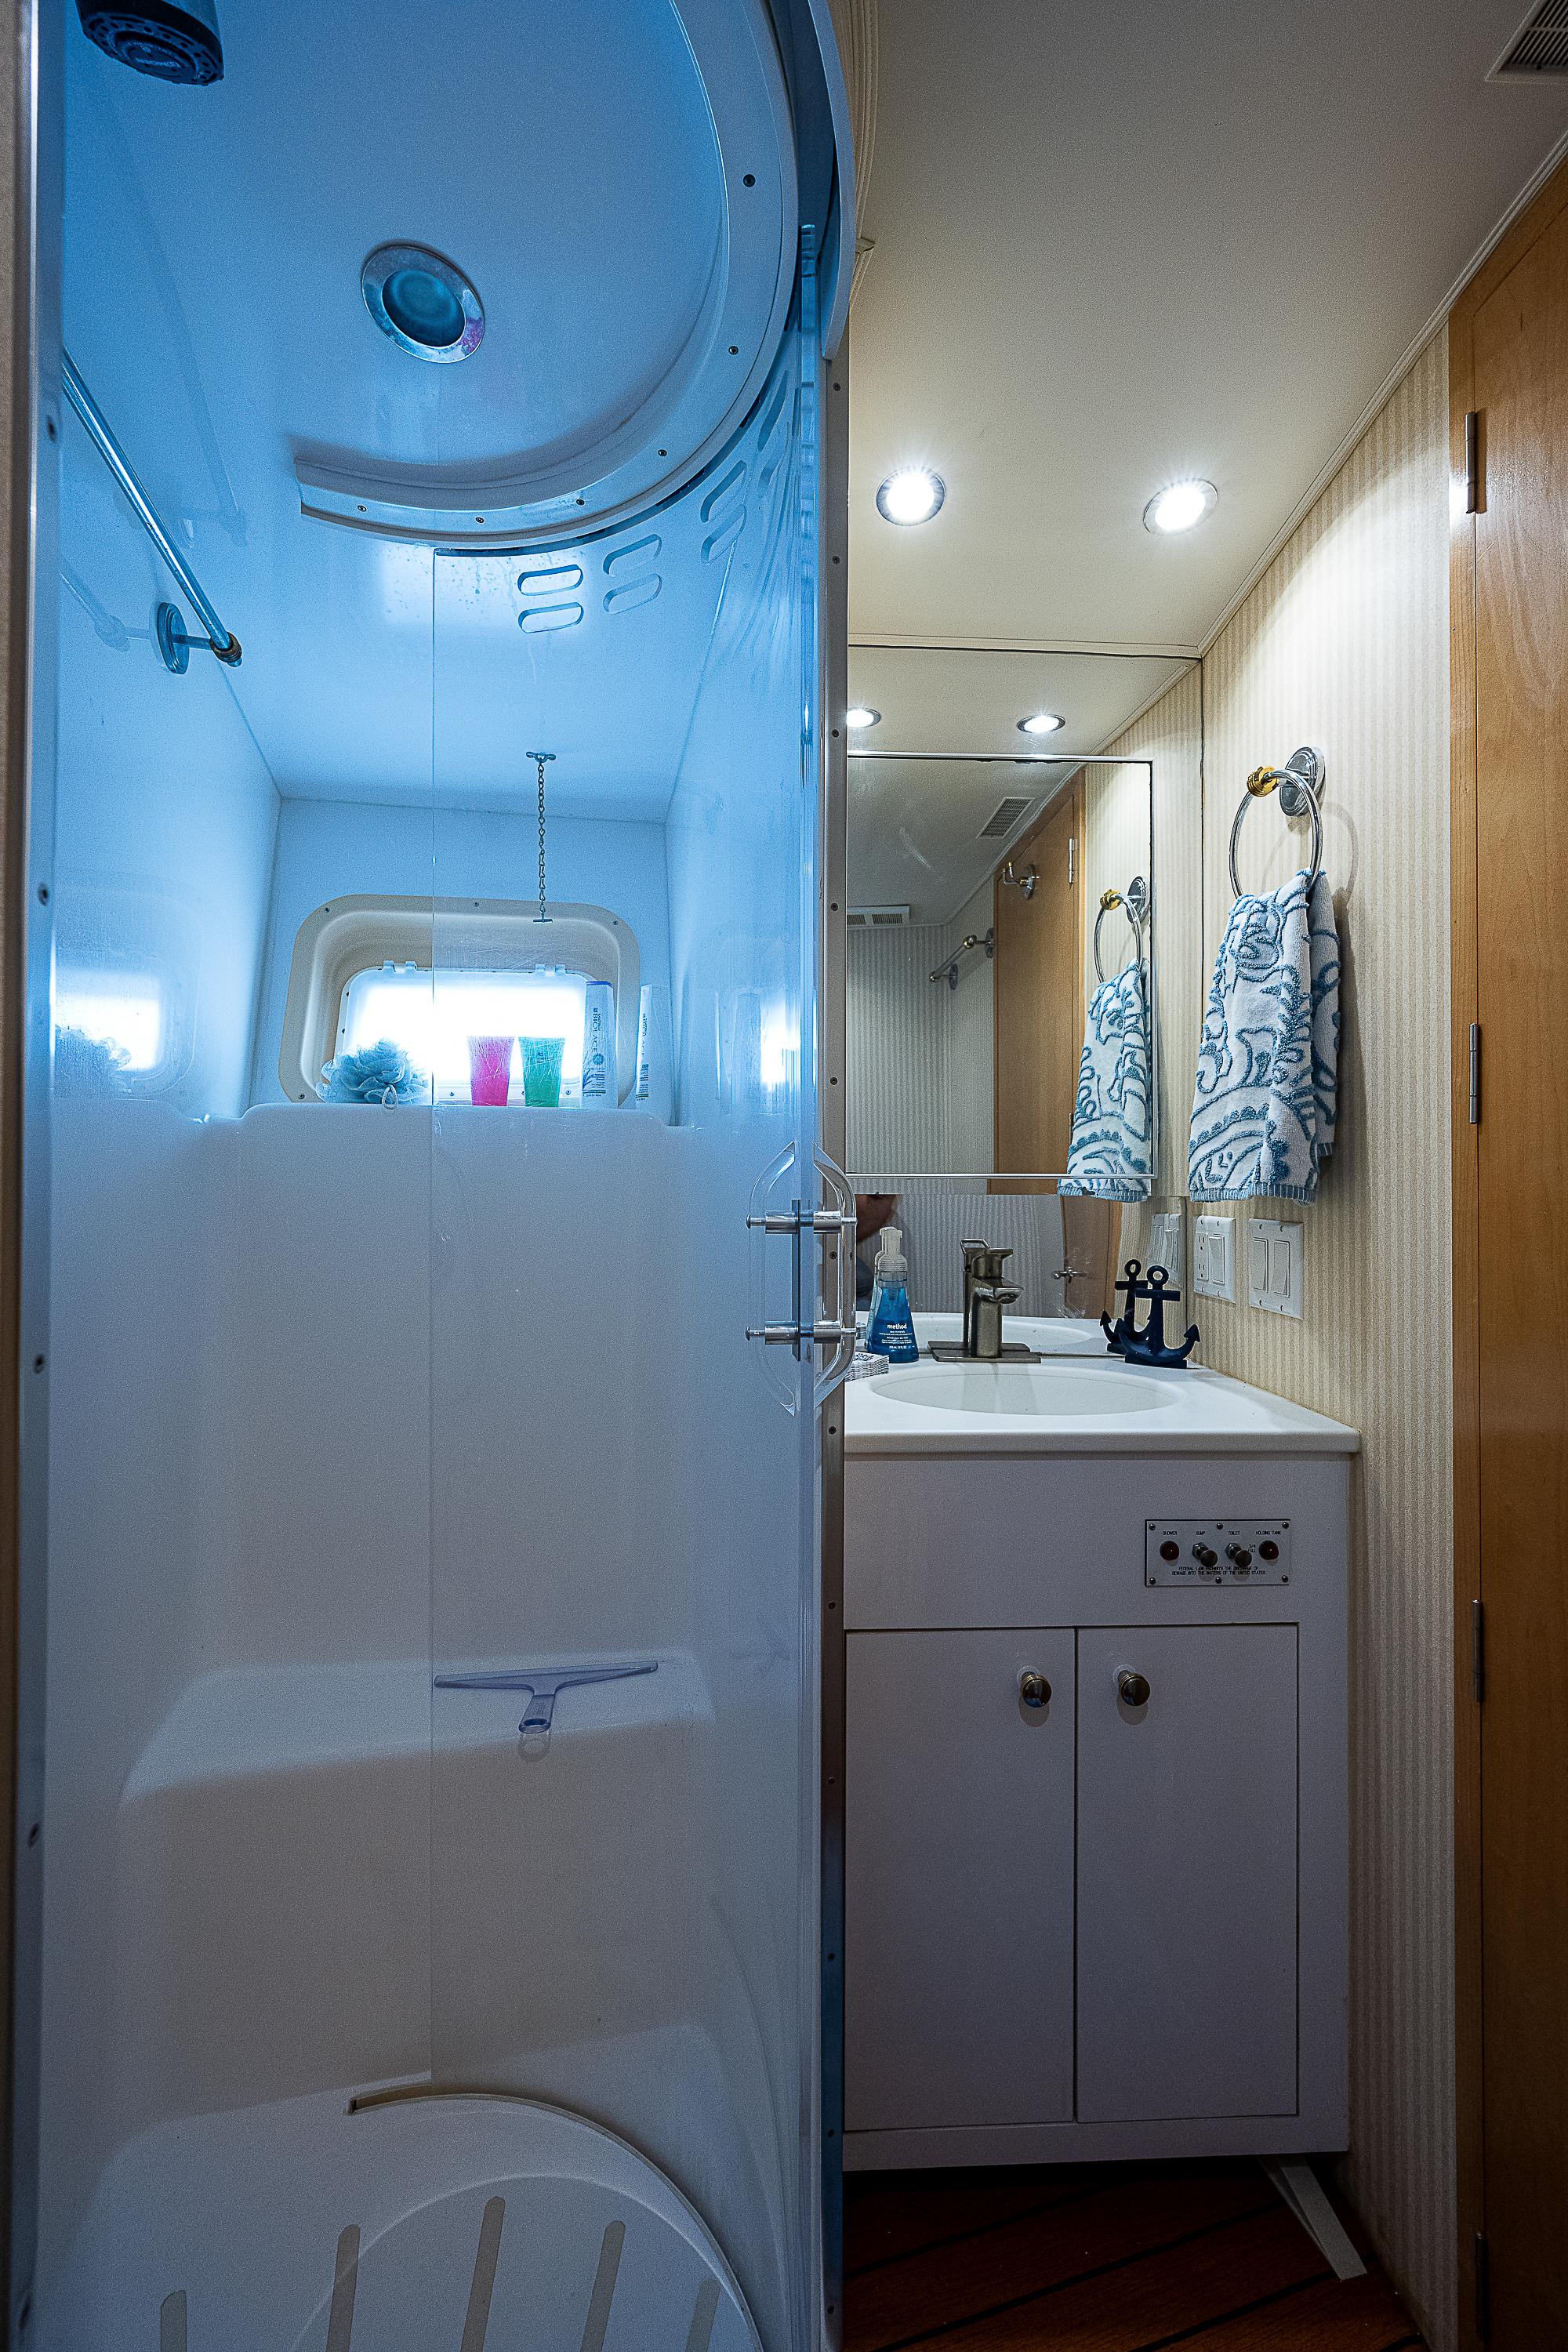 Hatteras 52 Cockpit Motor Yacht Forty Nine Fifty One - Guest Head, Walk In Shower, Vanity with Sink